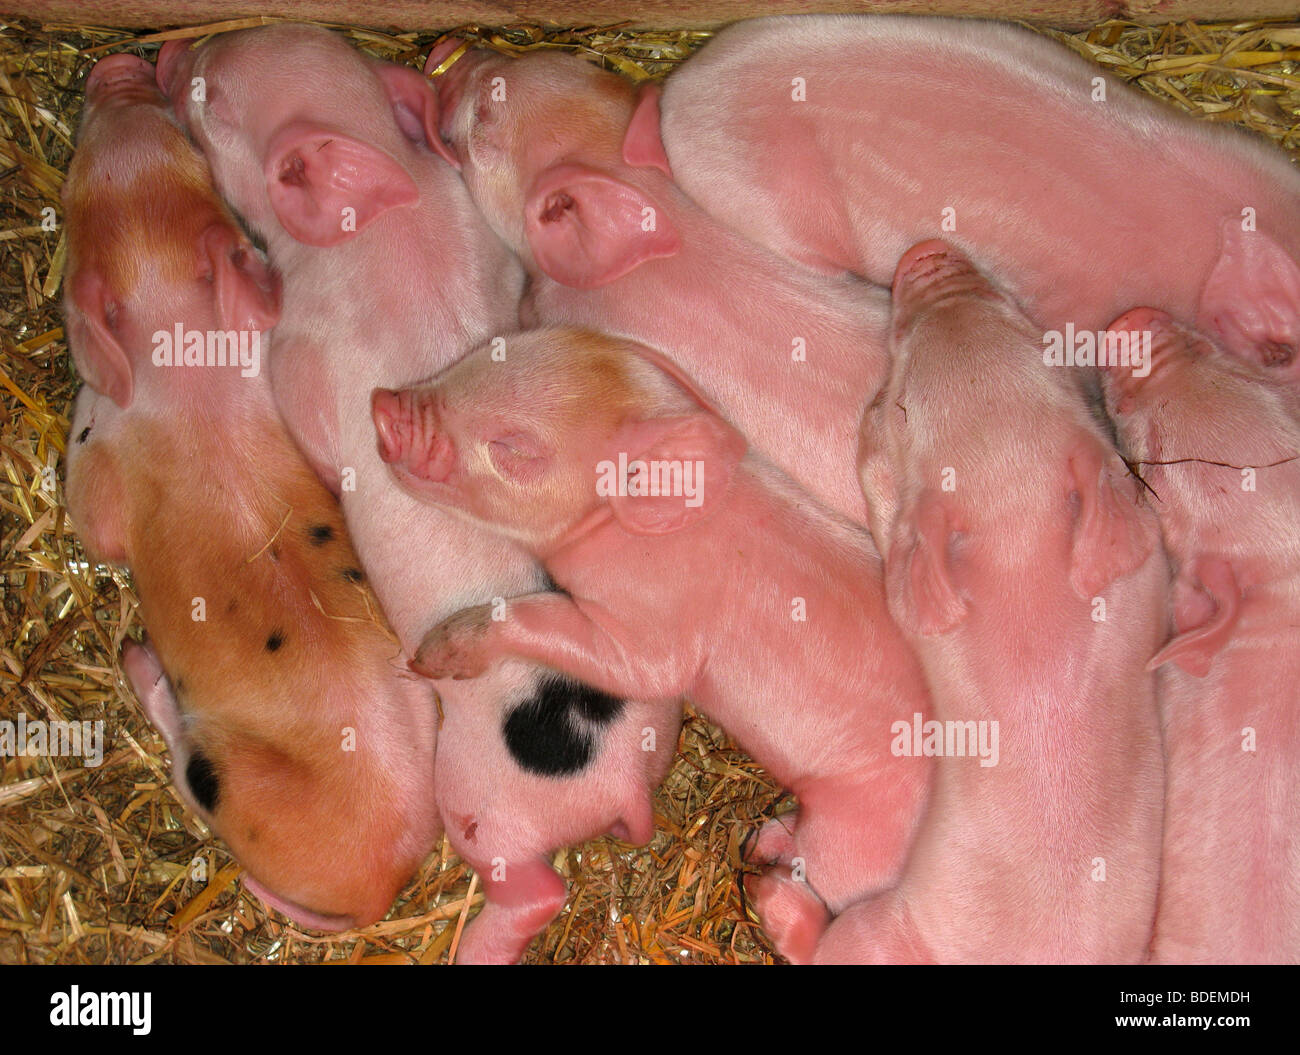 Middle White piglets Stock Photo